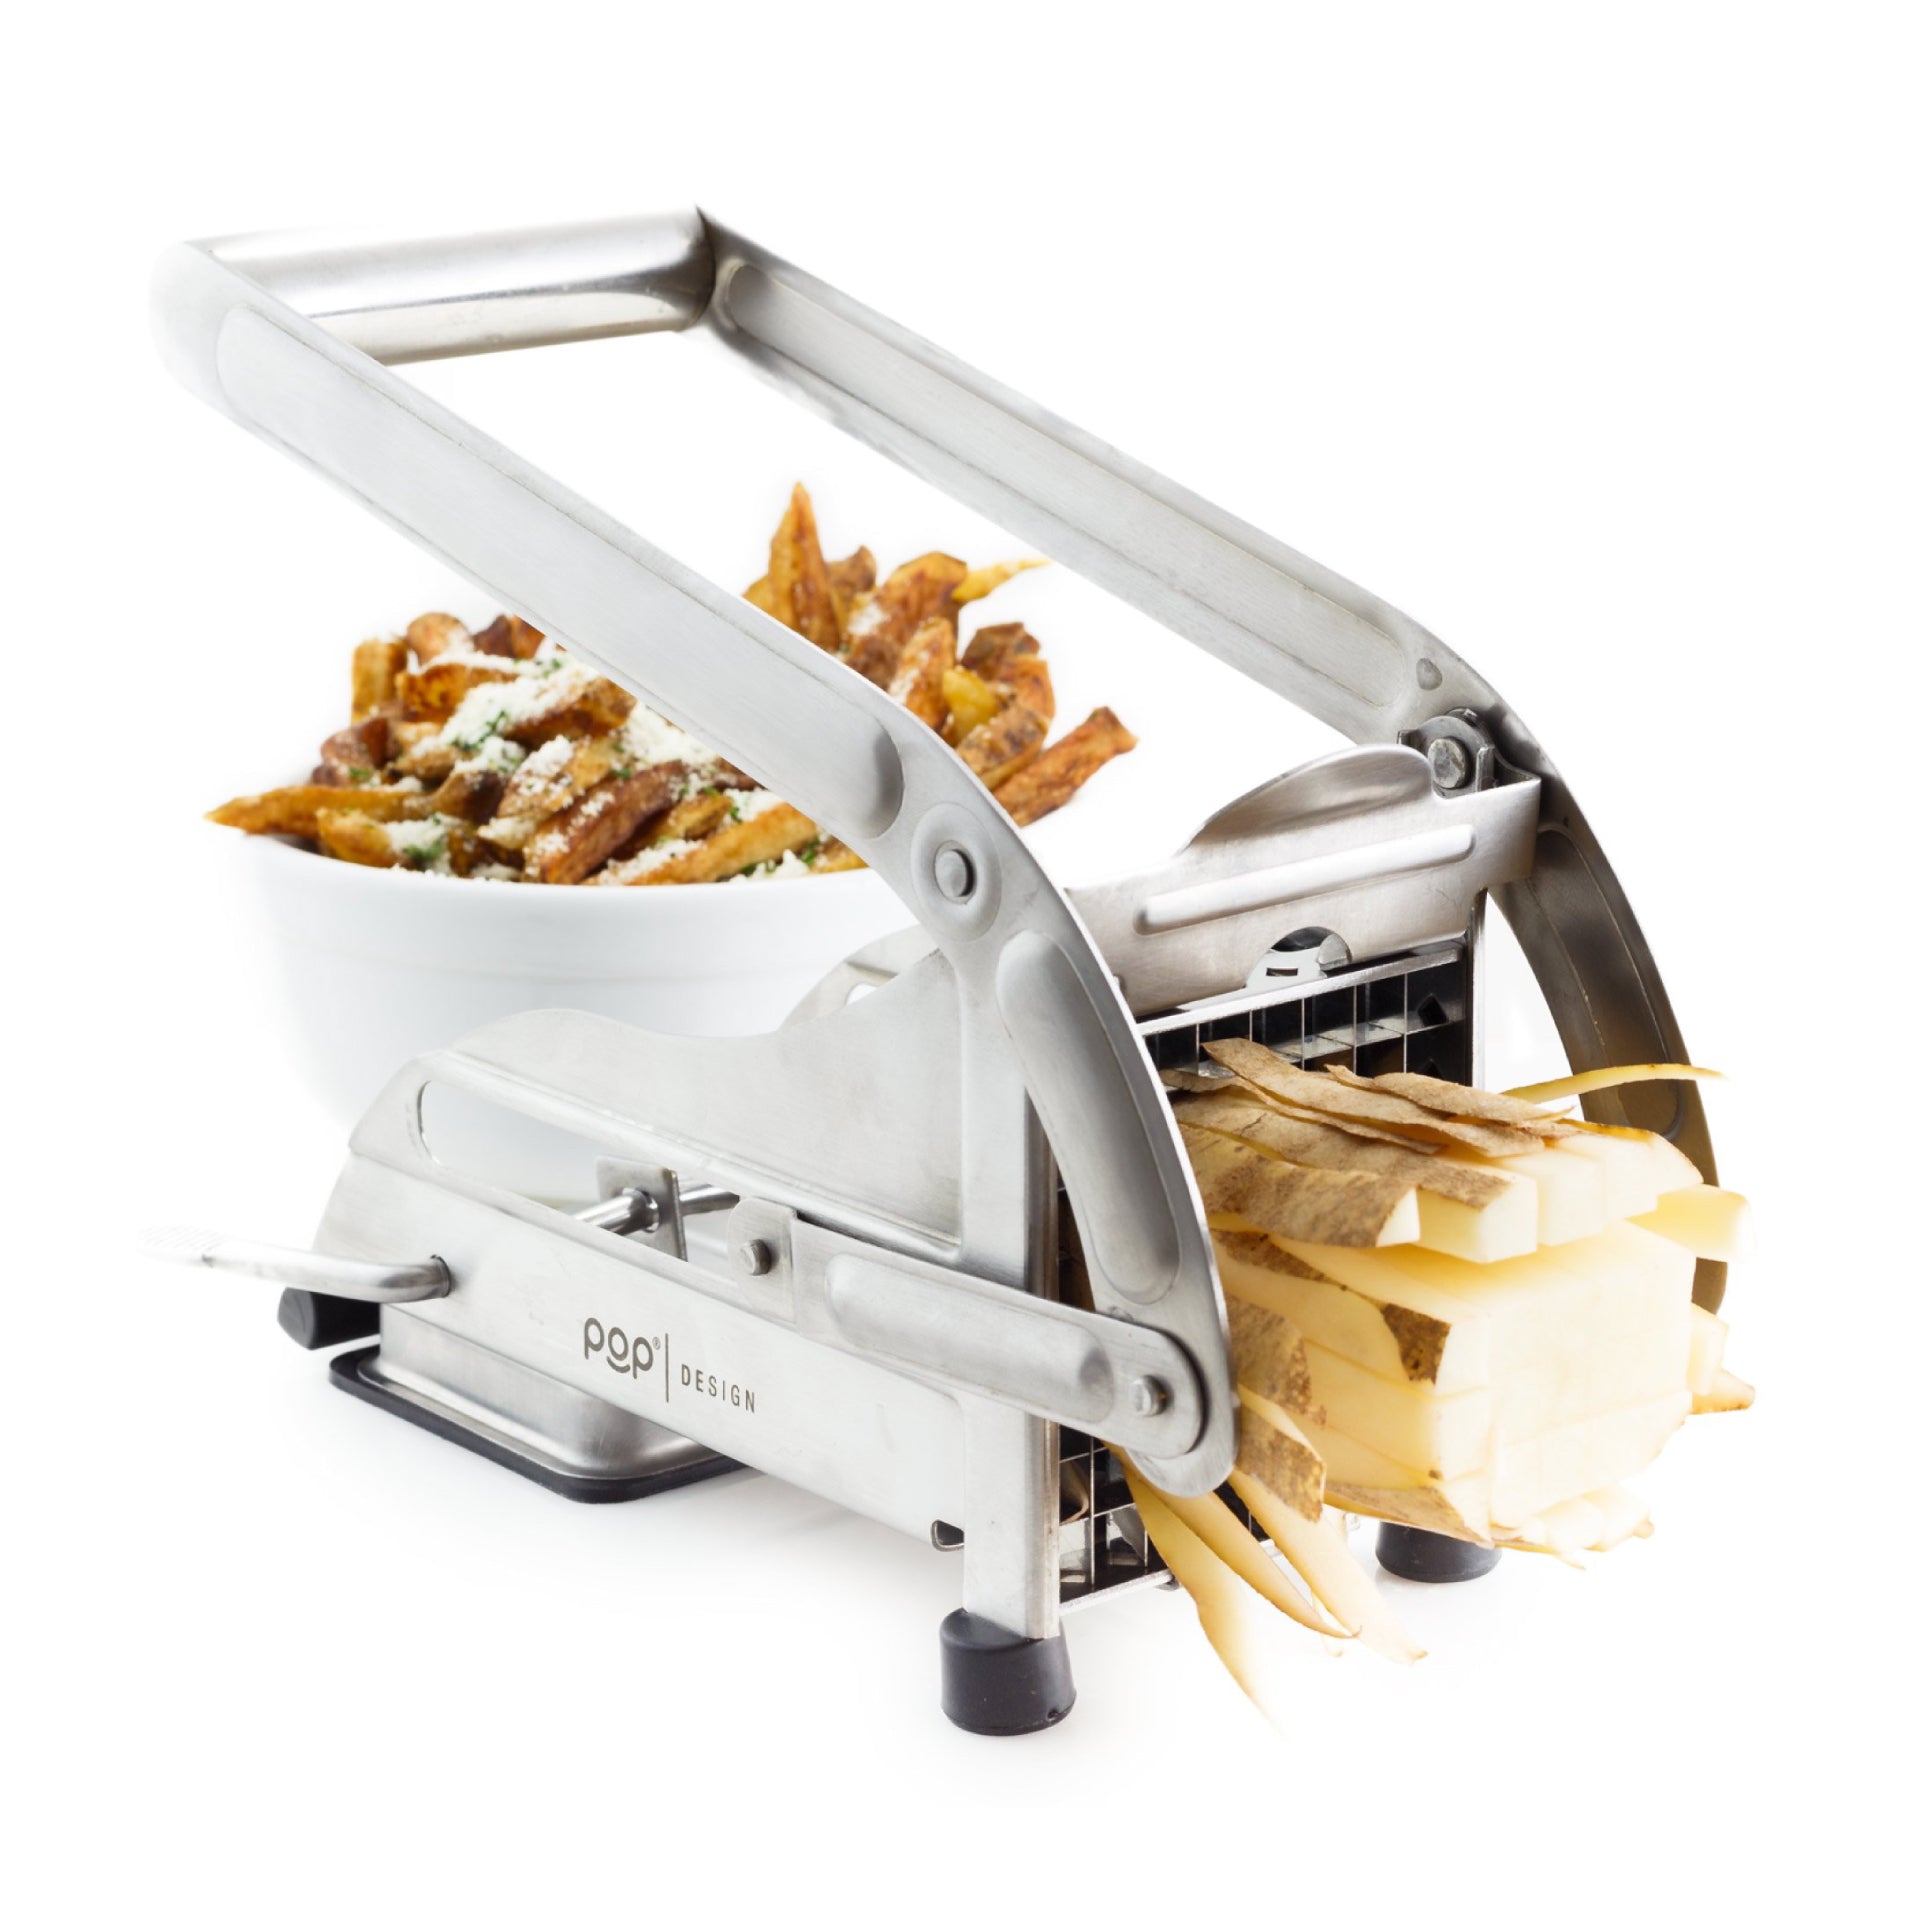 Best French Fry Cutter Sweet Potatoes - Stainless Steel Potato